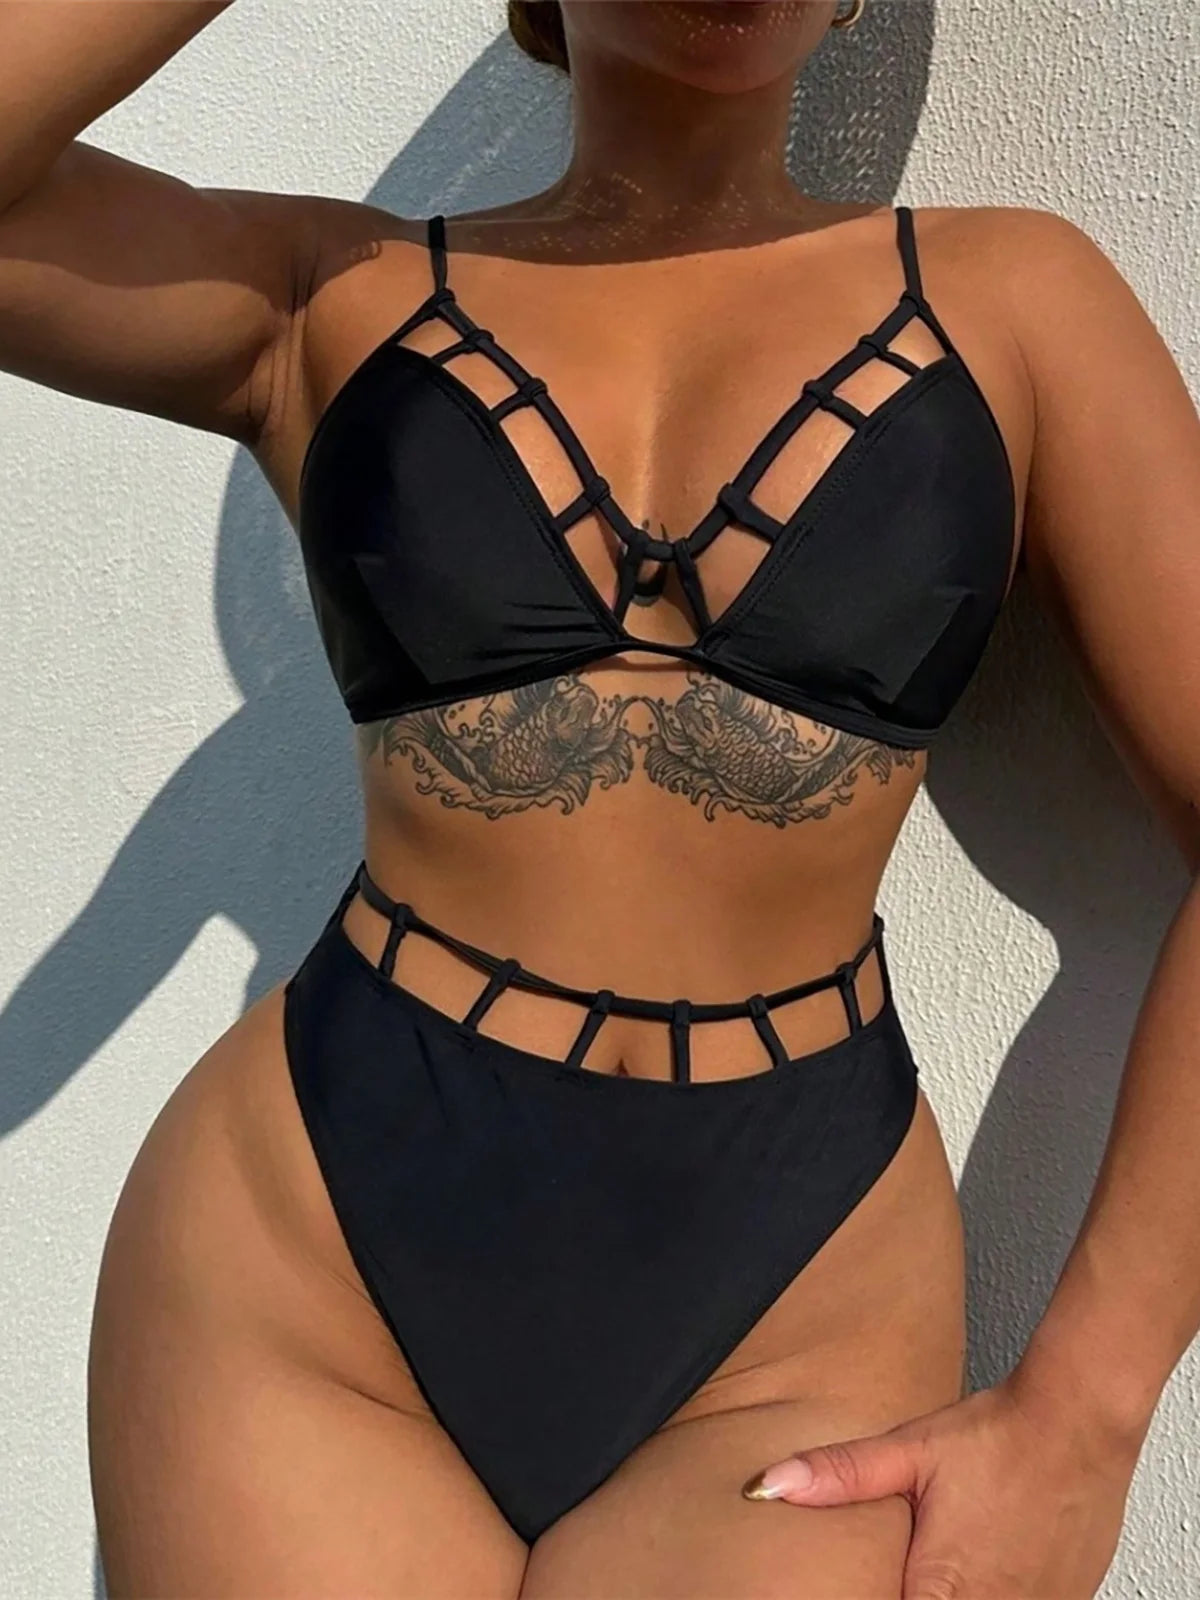 Sophisticated Two-Piece Swimsuit for Women, Features Bold Cut-Out Design and High-Waist Bikini Bottoms, High-Leg Cut, Fits True to Size, Available in Sizes S to XL, Material: Nylon and Spandex, Solid Pattern, Wire Free, Ideal for a Blend of Contemporary Fashion and Classic Comfort, Black Color, Comes with Padding